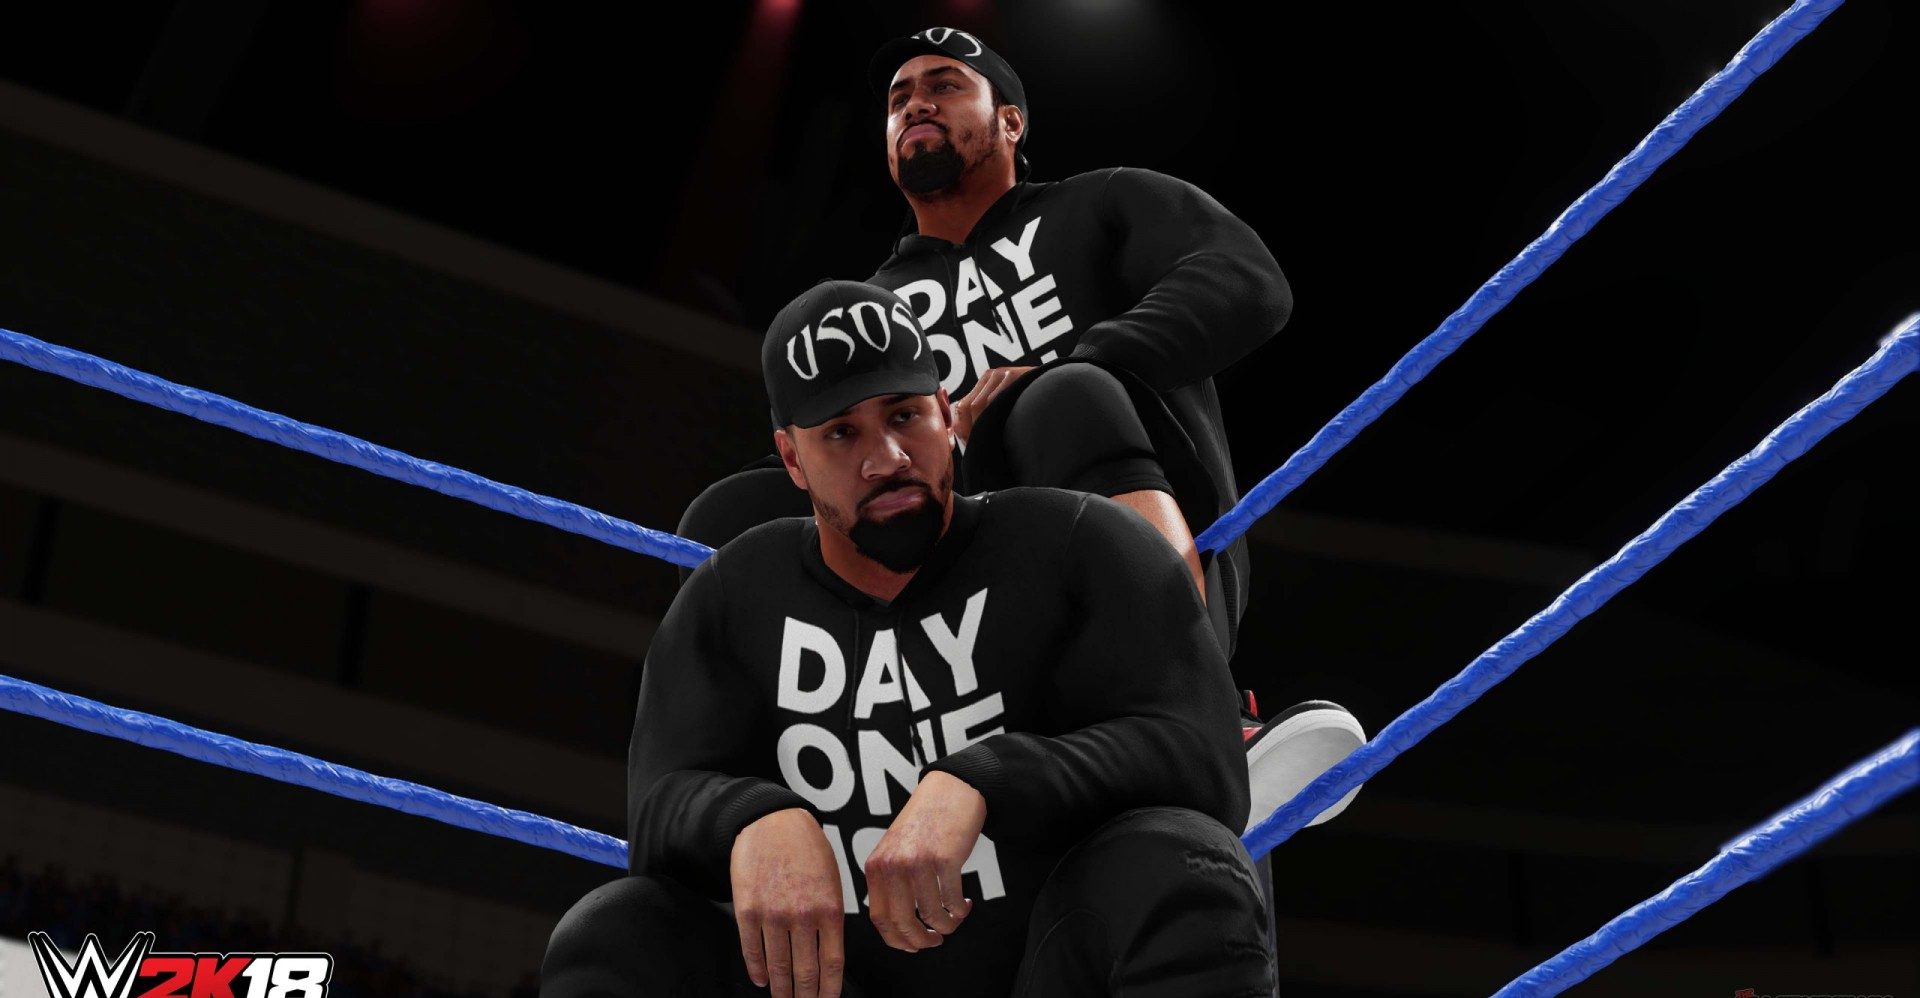 WWE 2K18 [Xbox One X Review]: That Day One Ish.